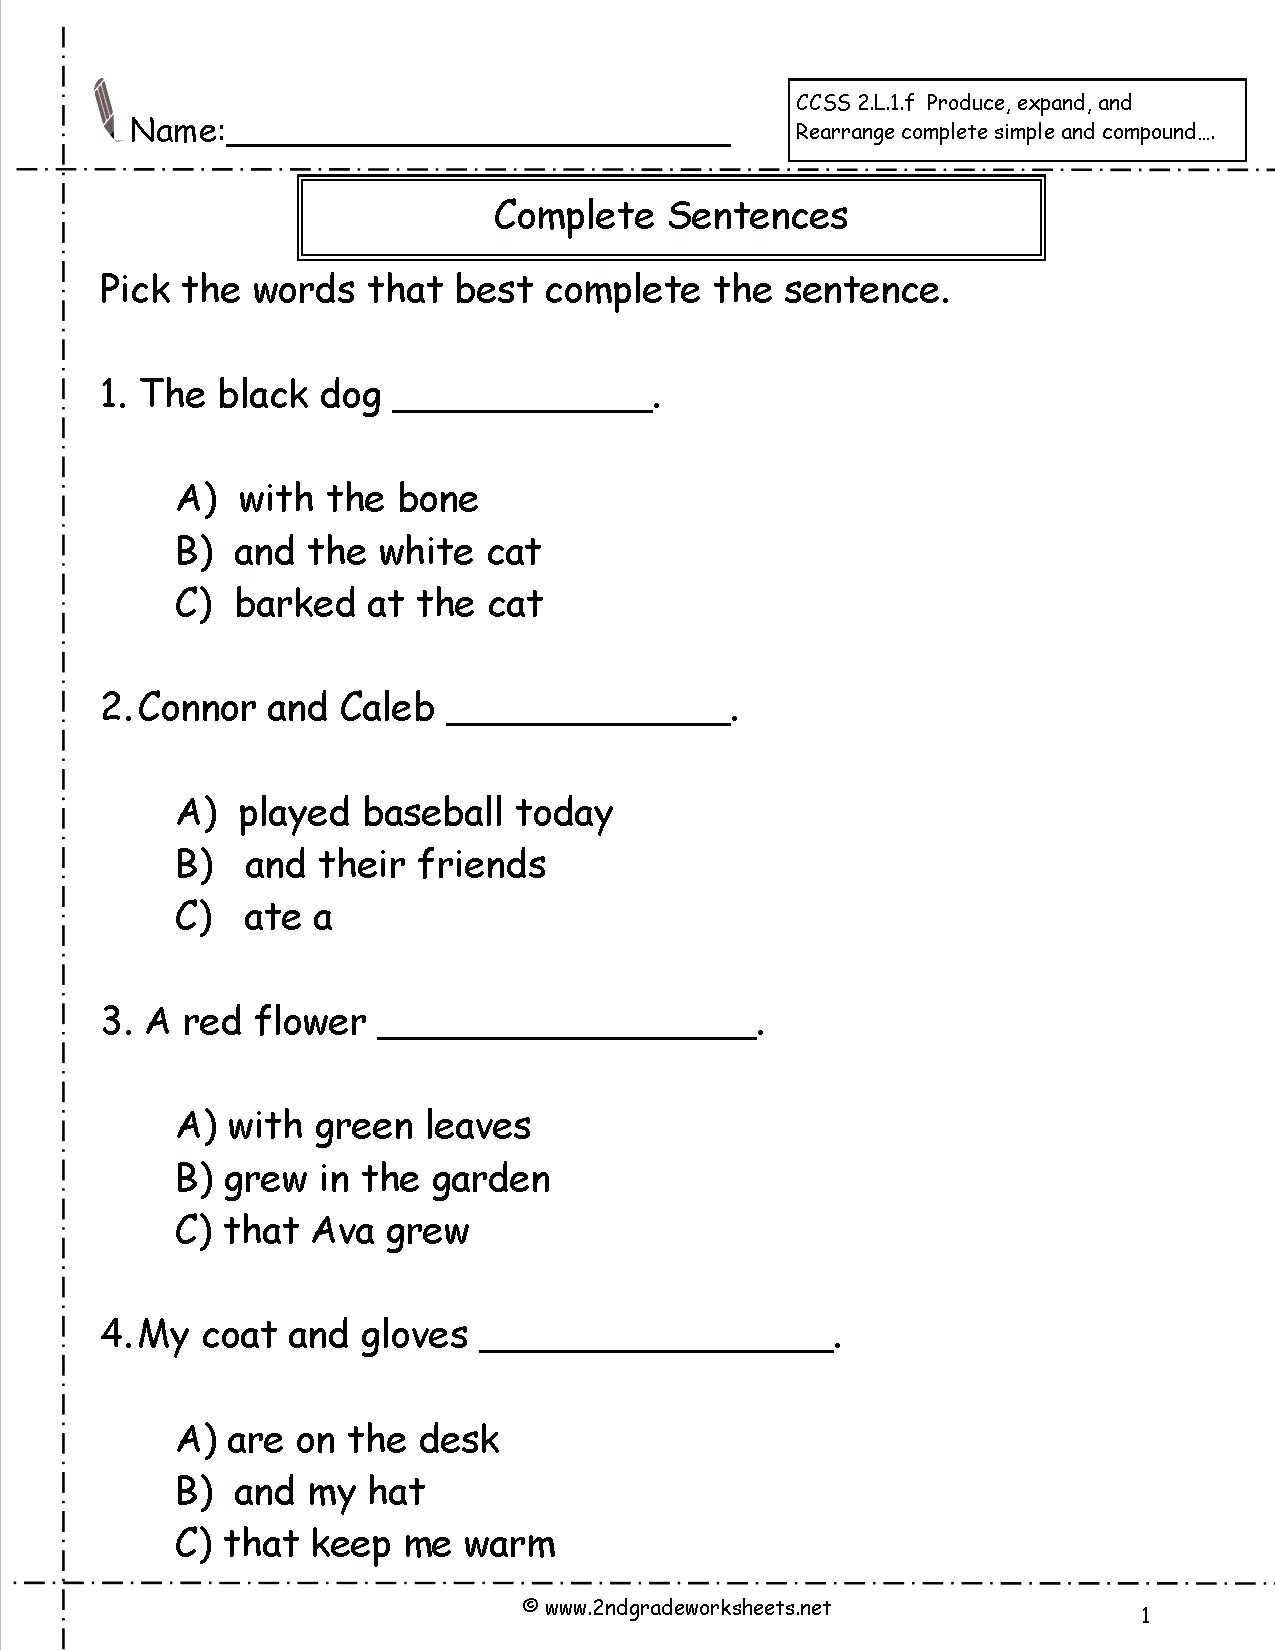 Simple Compound and Complex Sentences Worksheet Pdf with Answers as Well as Plex Sentences Worksheet Ks2 Gallery Worksheet for Kids Maths